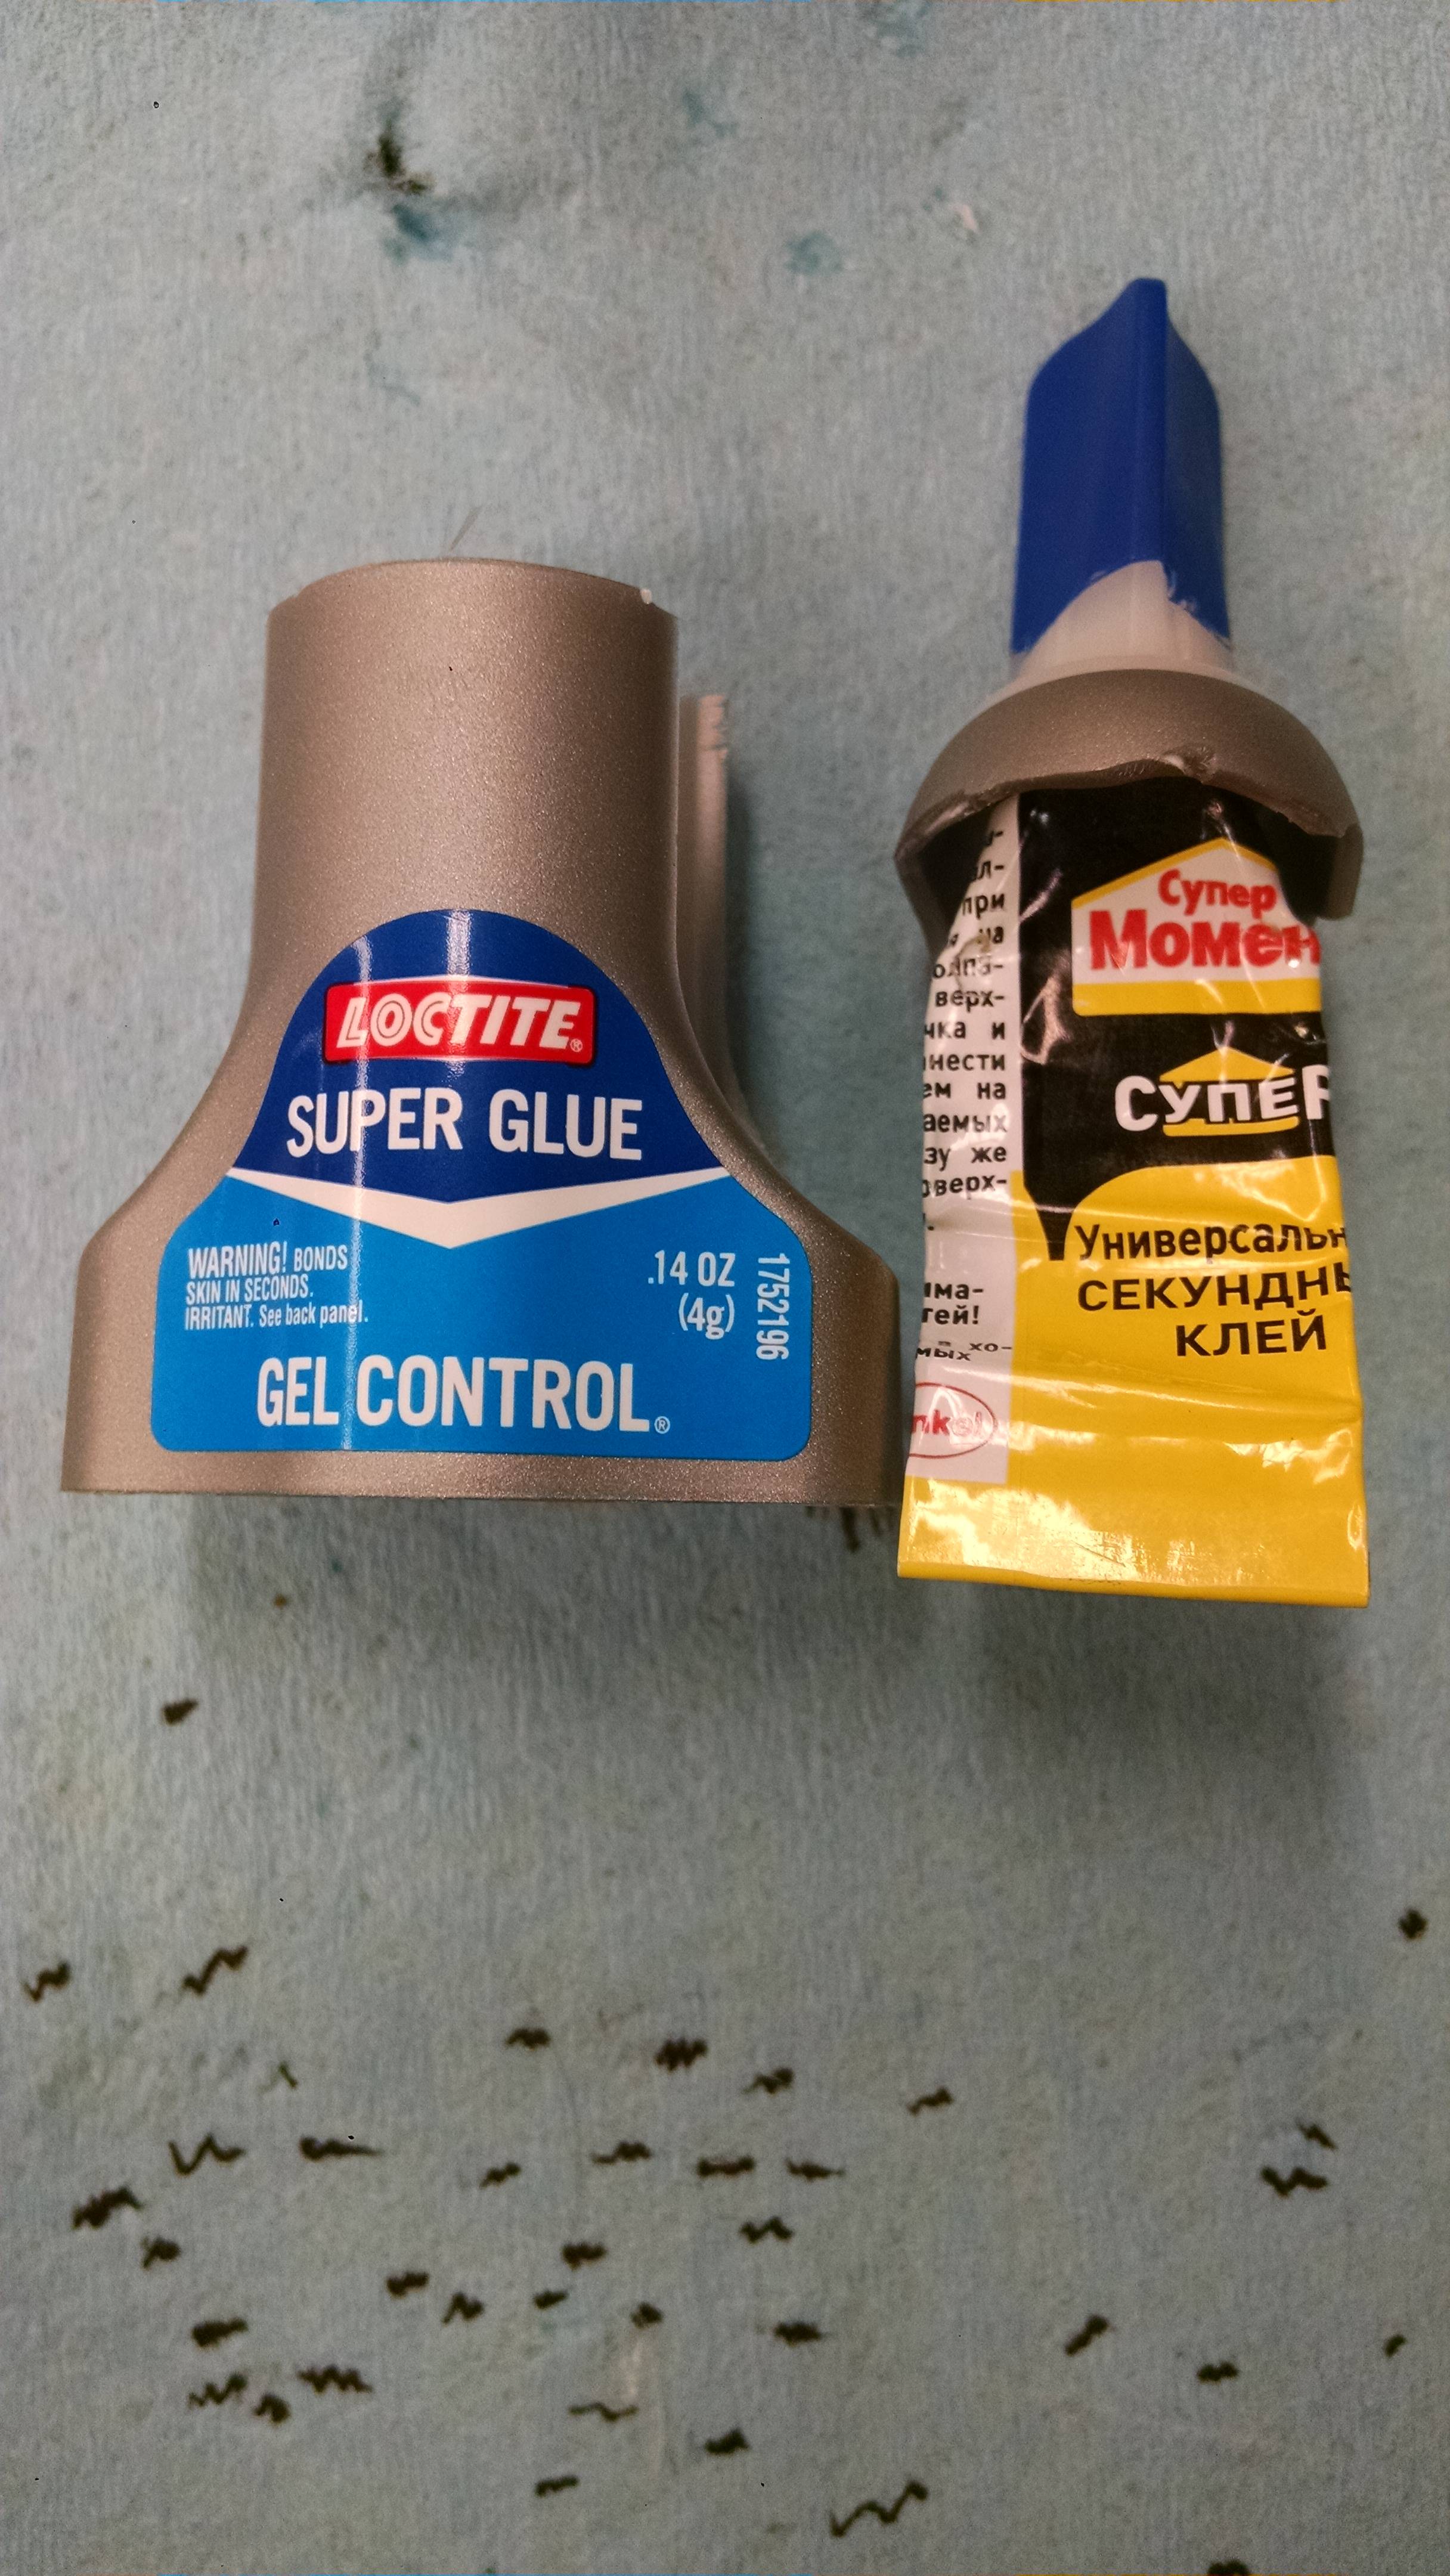 Cut this super glue out of its plastic container (US) and found a 

Russian variety.